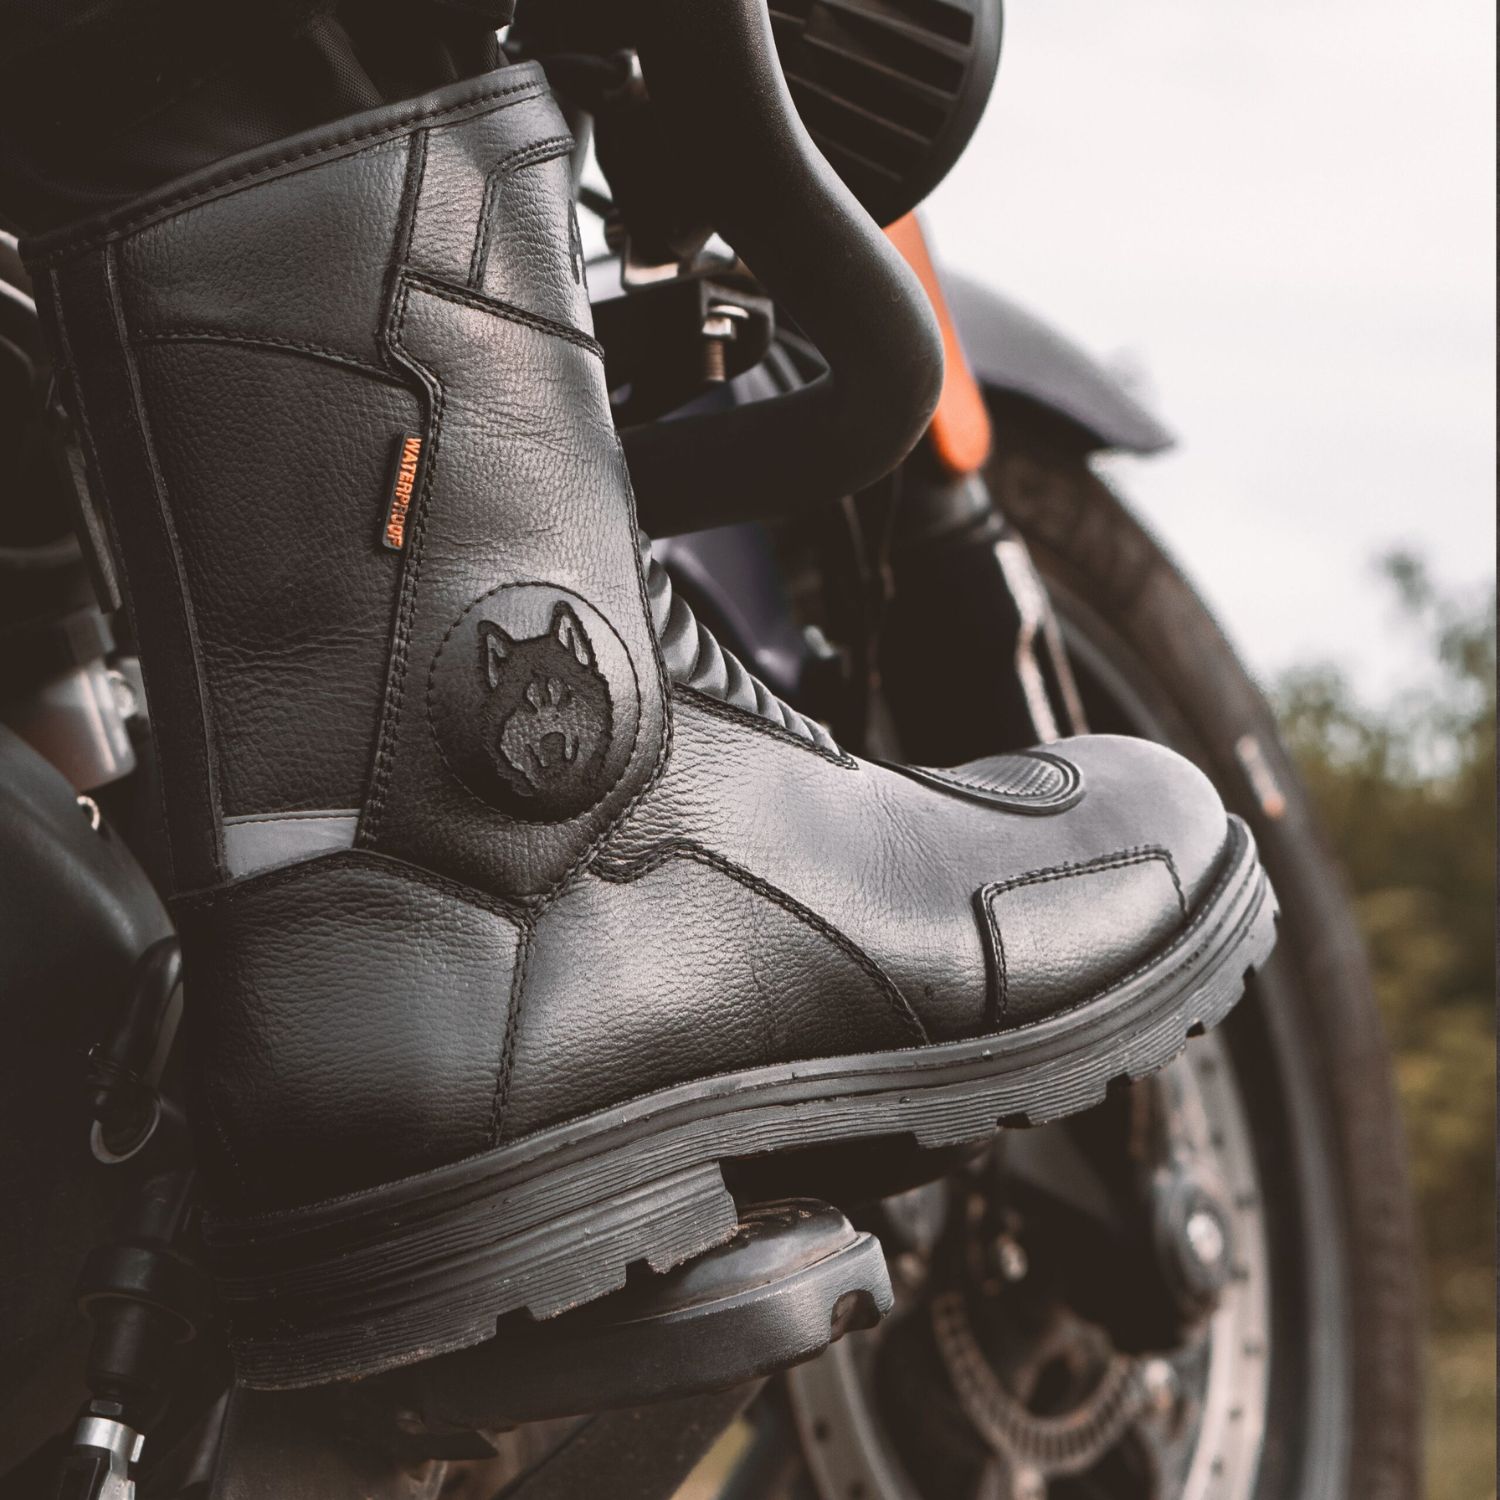 Women's Motorcycle Boots & Riding Shoes | Shop Best Riding Boots - Cycle  Gear-totobed.com.vn